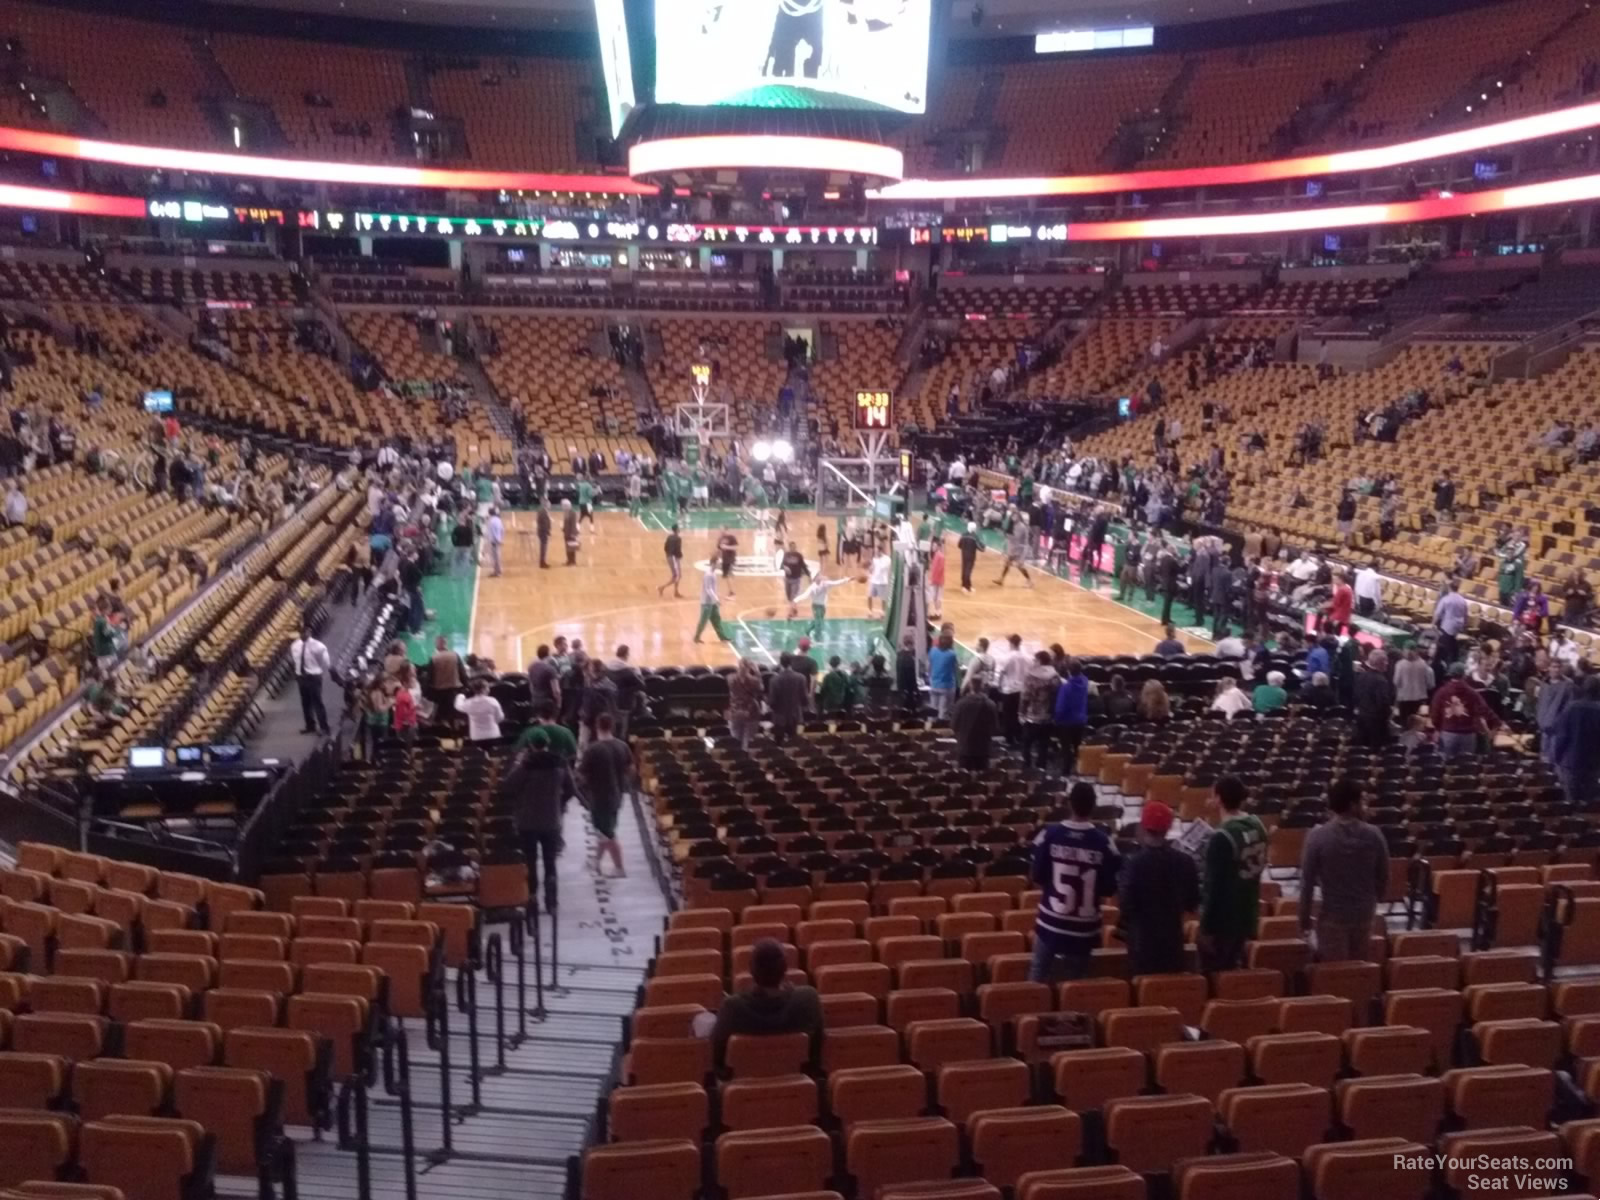 loge 7, row 10 seat view  for basketball - td garden